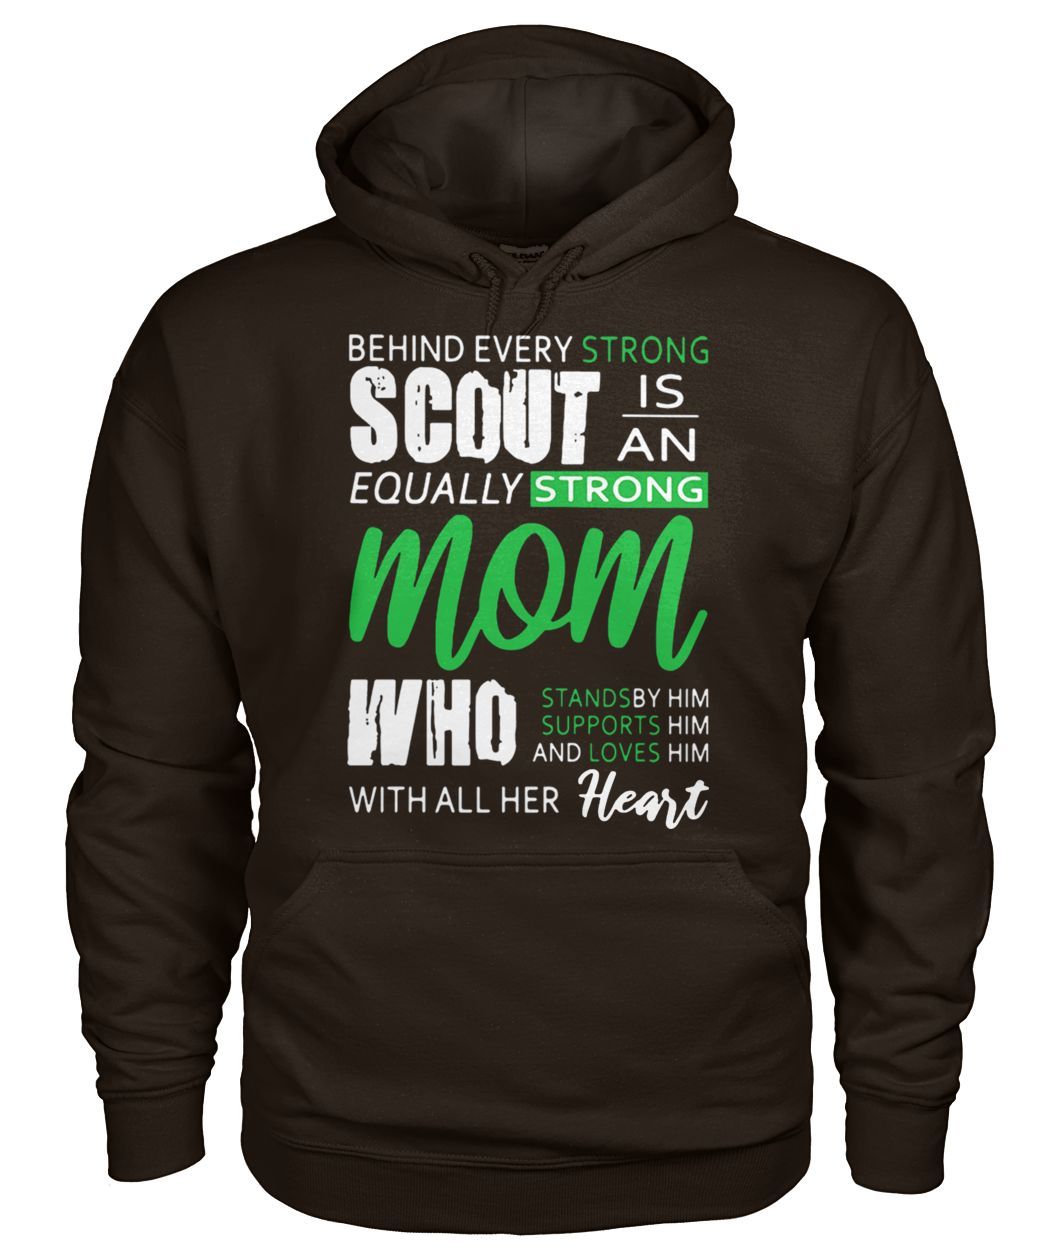 Behind every strong scout is an equally strong mom gildan hoodie